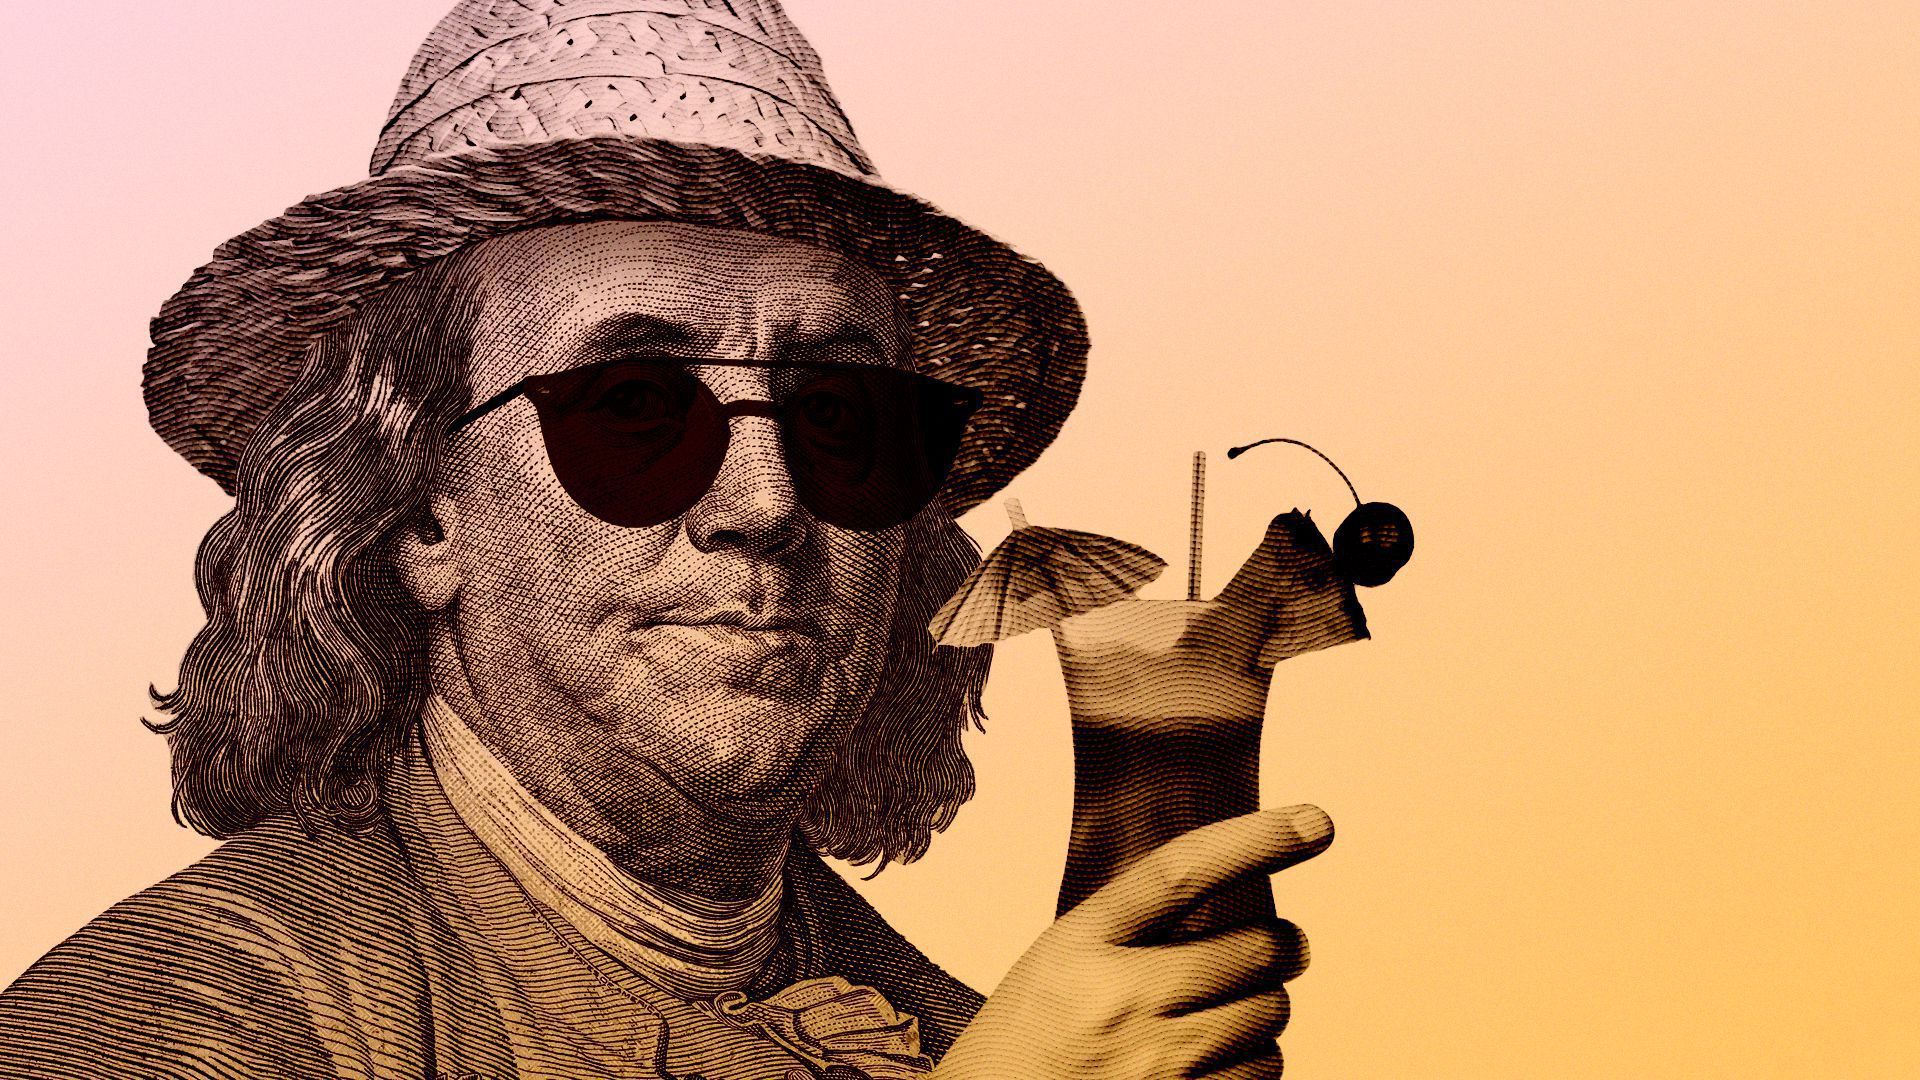 illustration of Ben Franklin wearing a hat and sunglasses sipping on a tropical drink